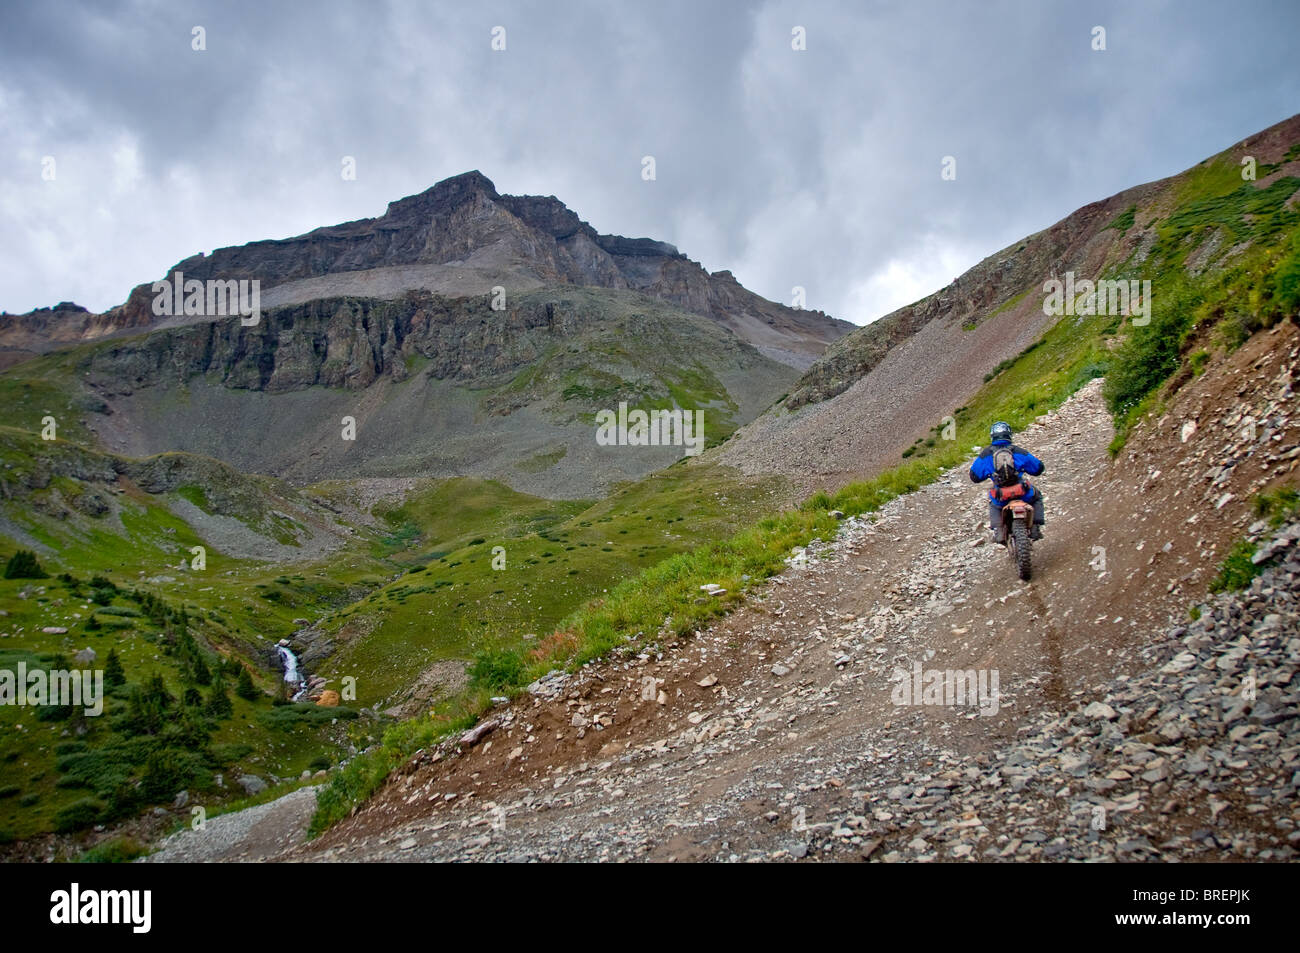 Motorcycle rider approaching Mount Sneffels, Yankee Boy Basin, Ouray, Telluride, Colorado. Stock Photo